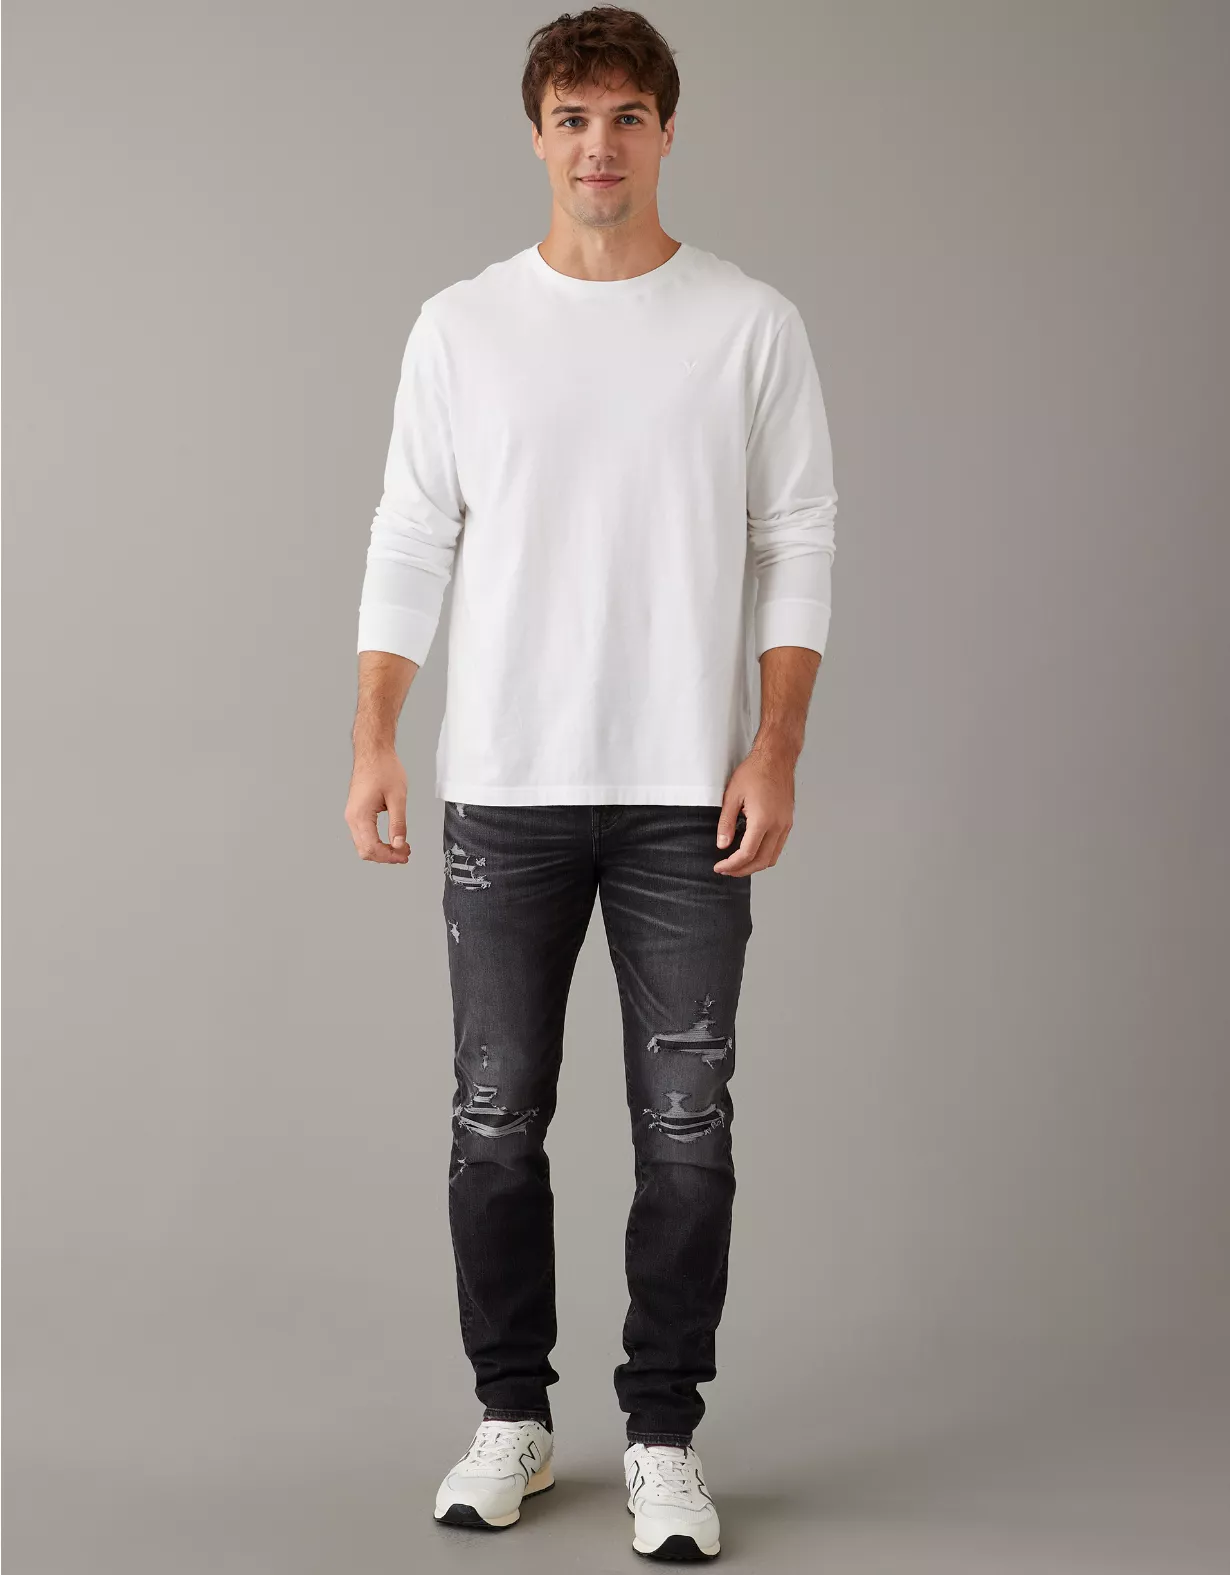 AE AirFlex+ Patched Athletic Fit Jean